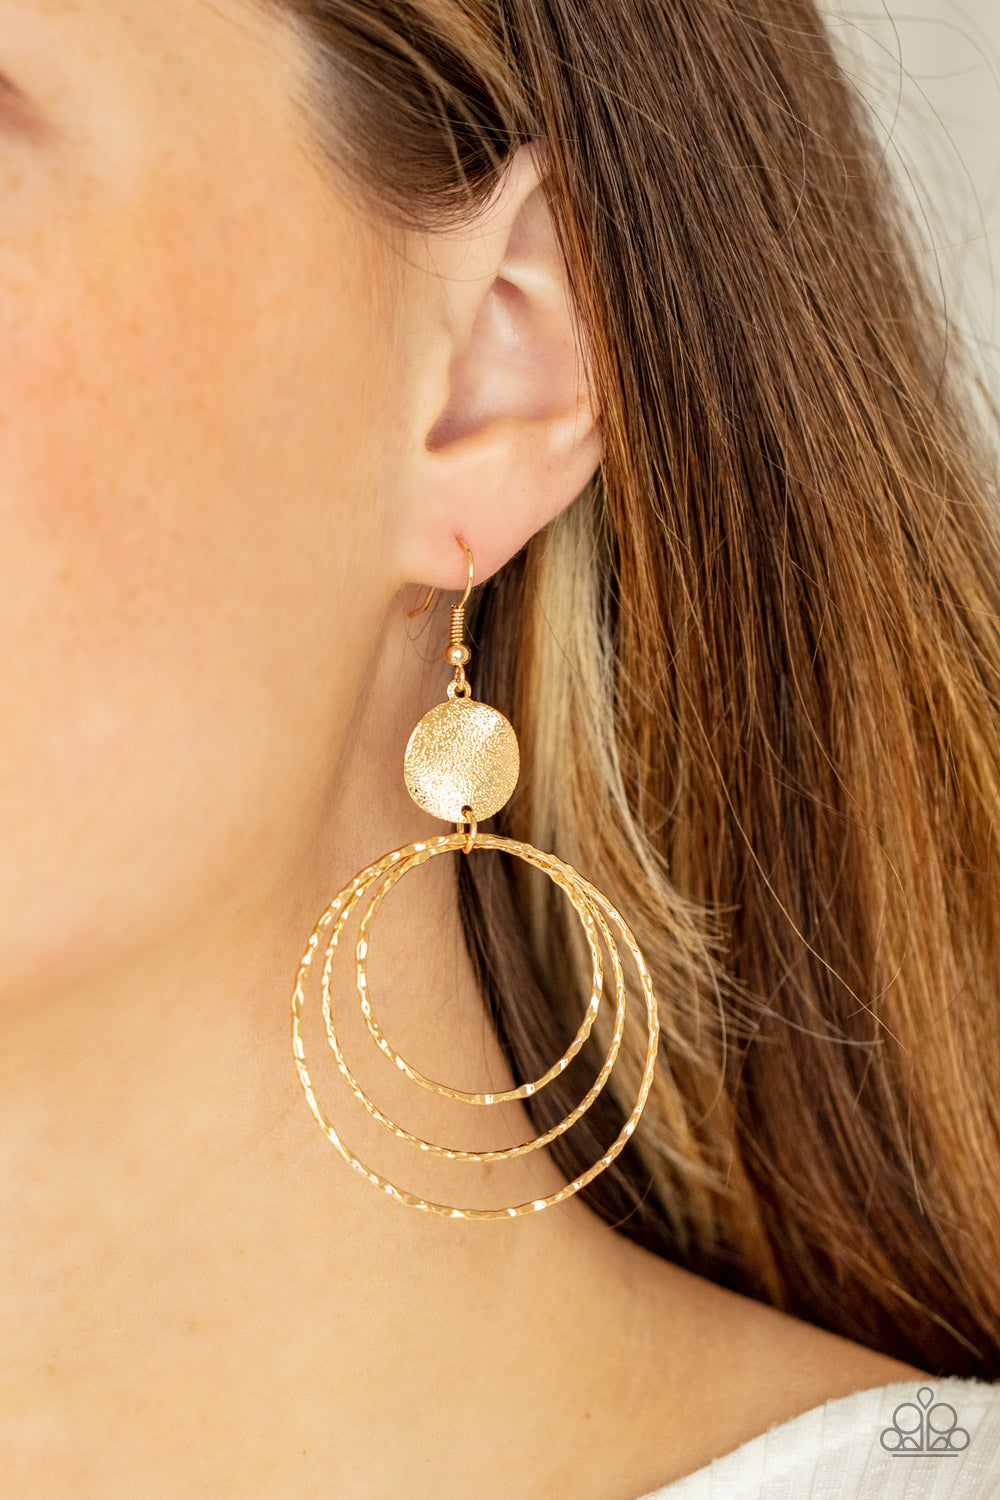 Paparazzi Accessories - Universal Rehearsal #E545 - Gold Earrings